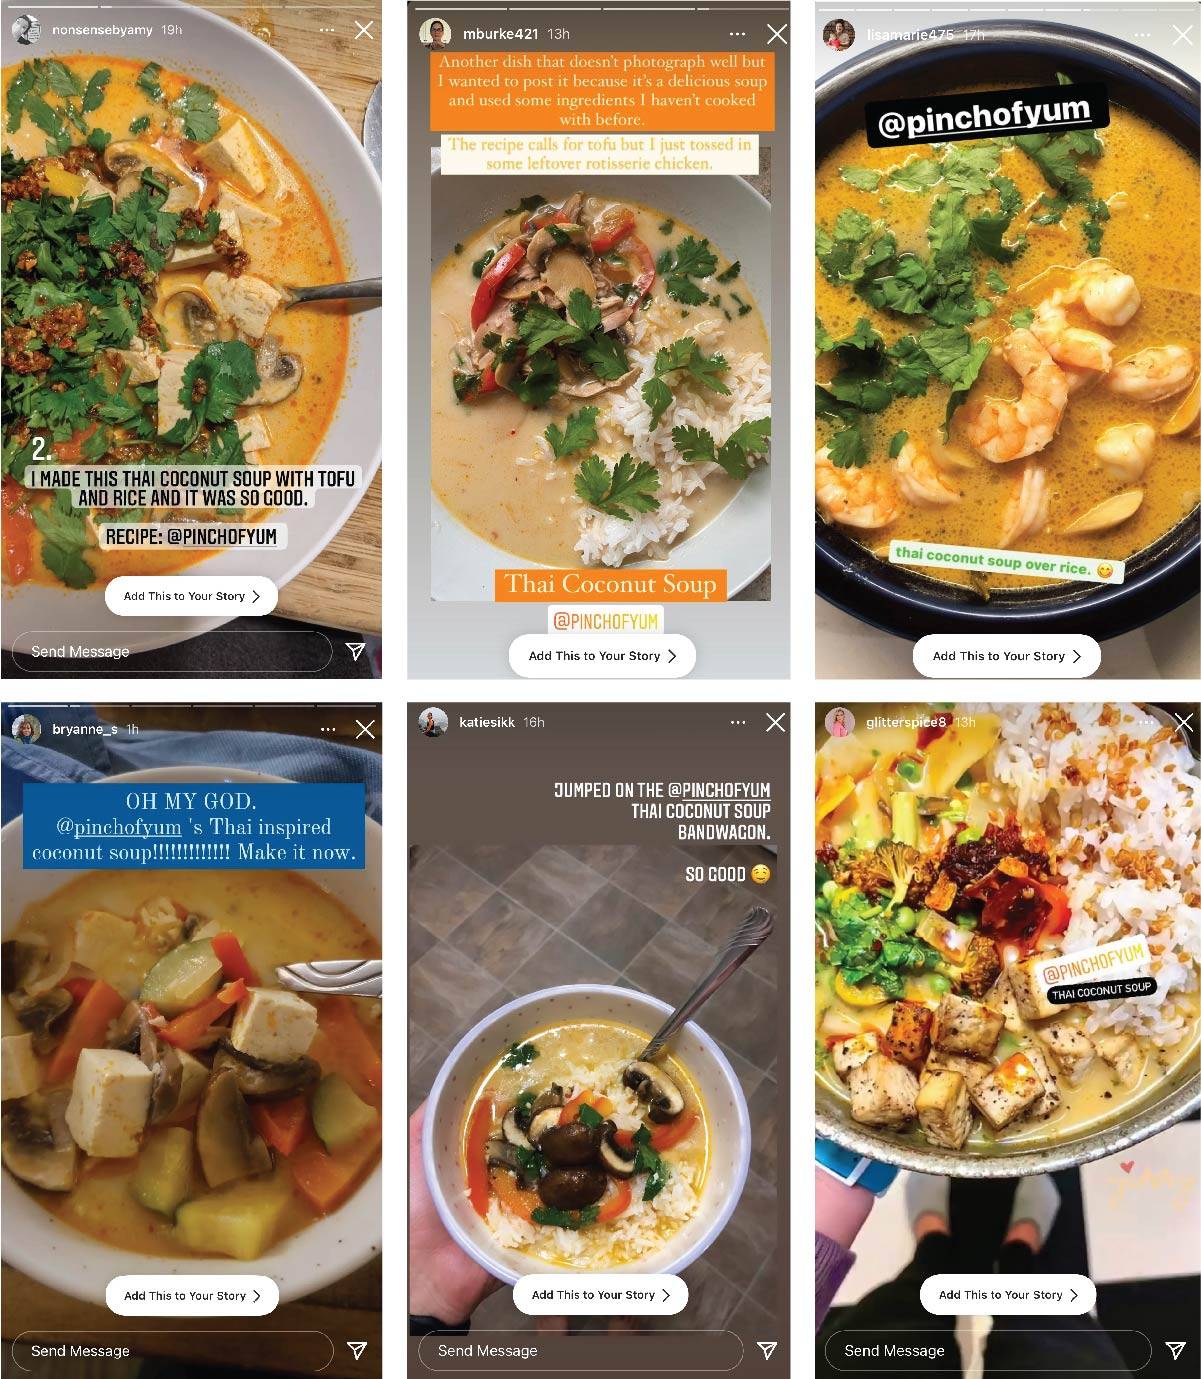 Instagram screenshots of POY readers making the Thai Coconut Soup recipe.